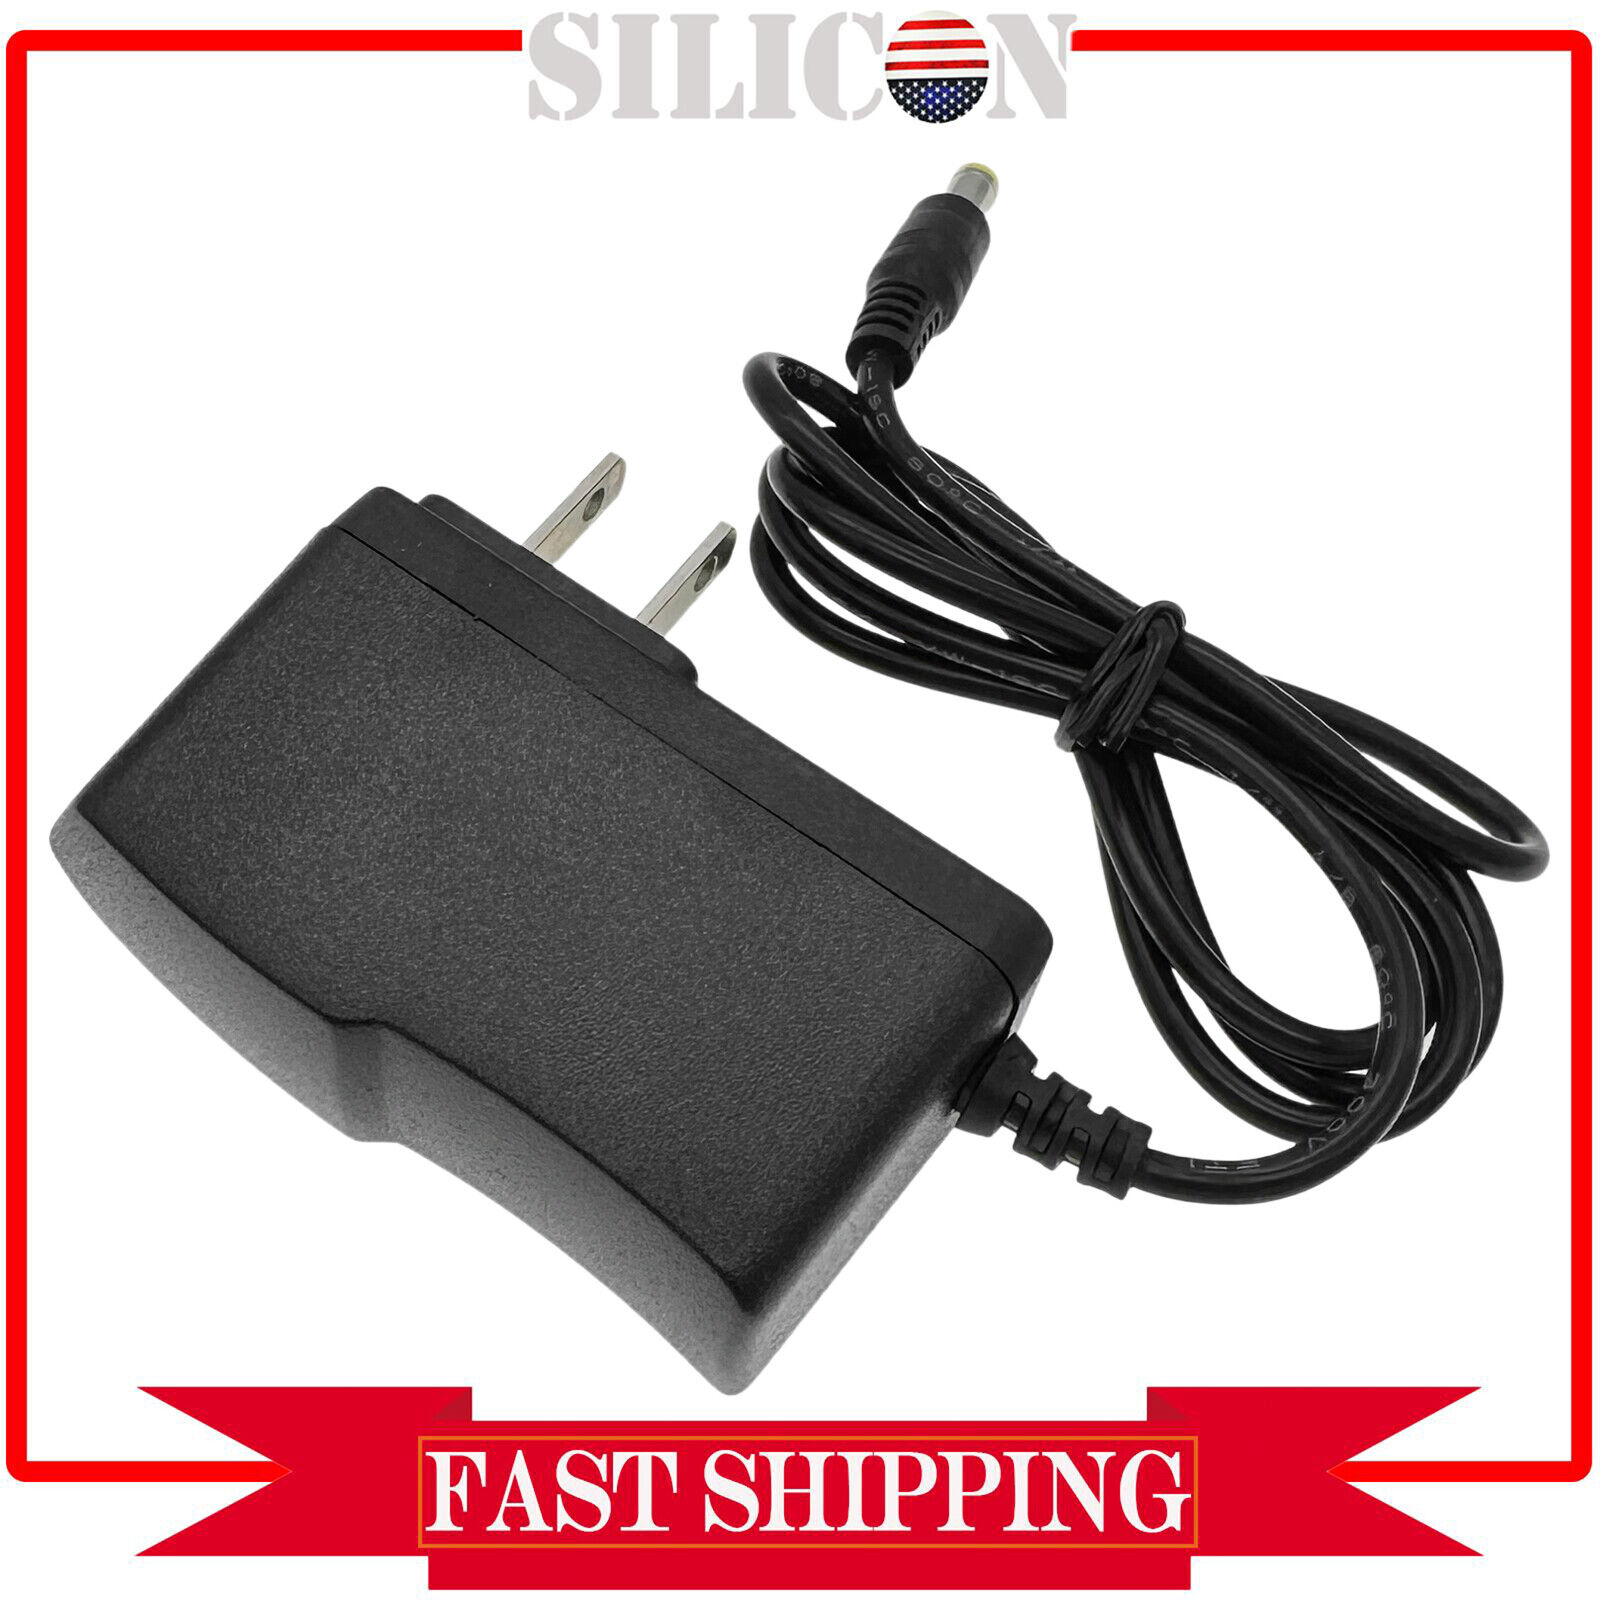 New 9V AC/DC Power Adapter Charger For Casio CTK-591 CTK-573 CTK-541 CTK-540